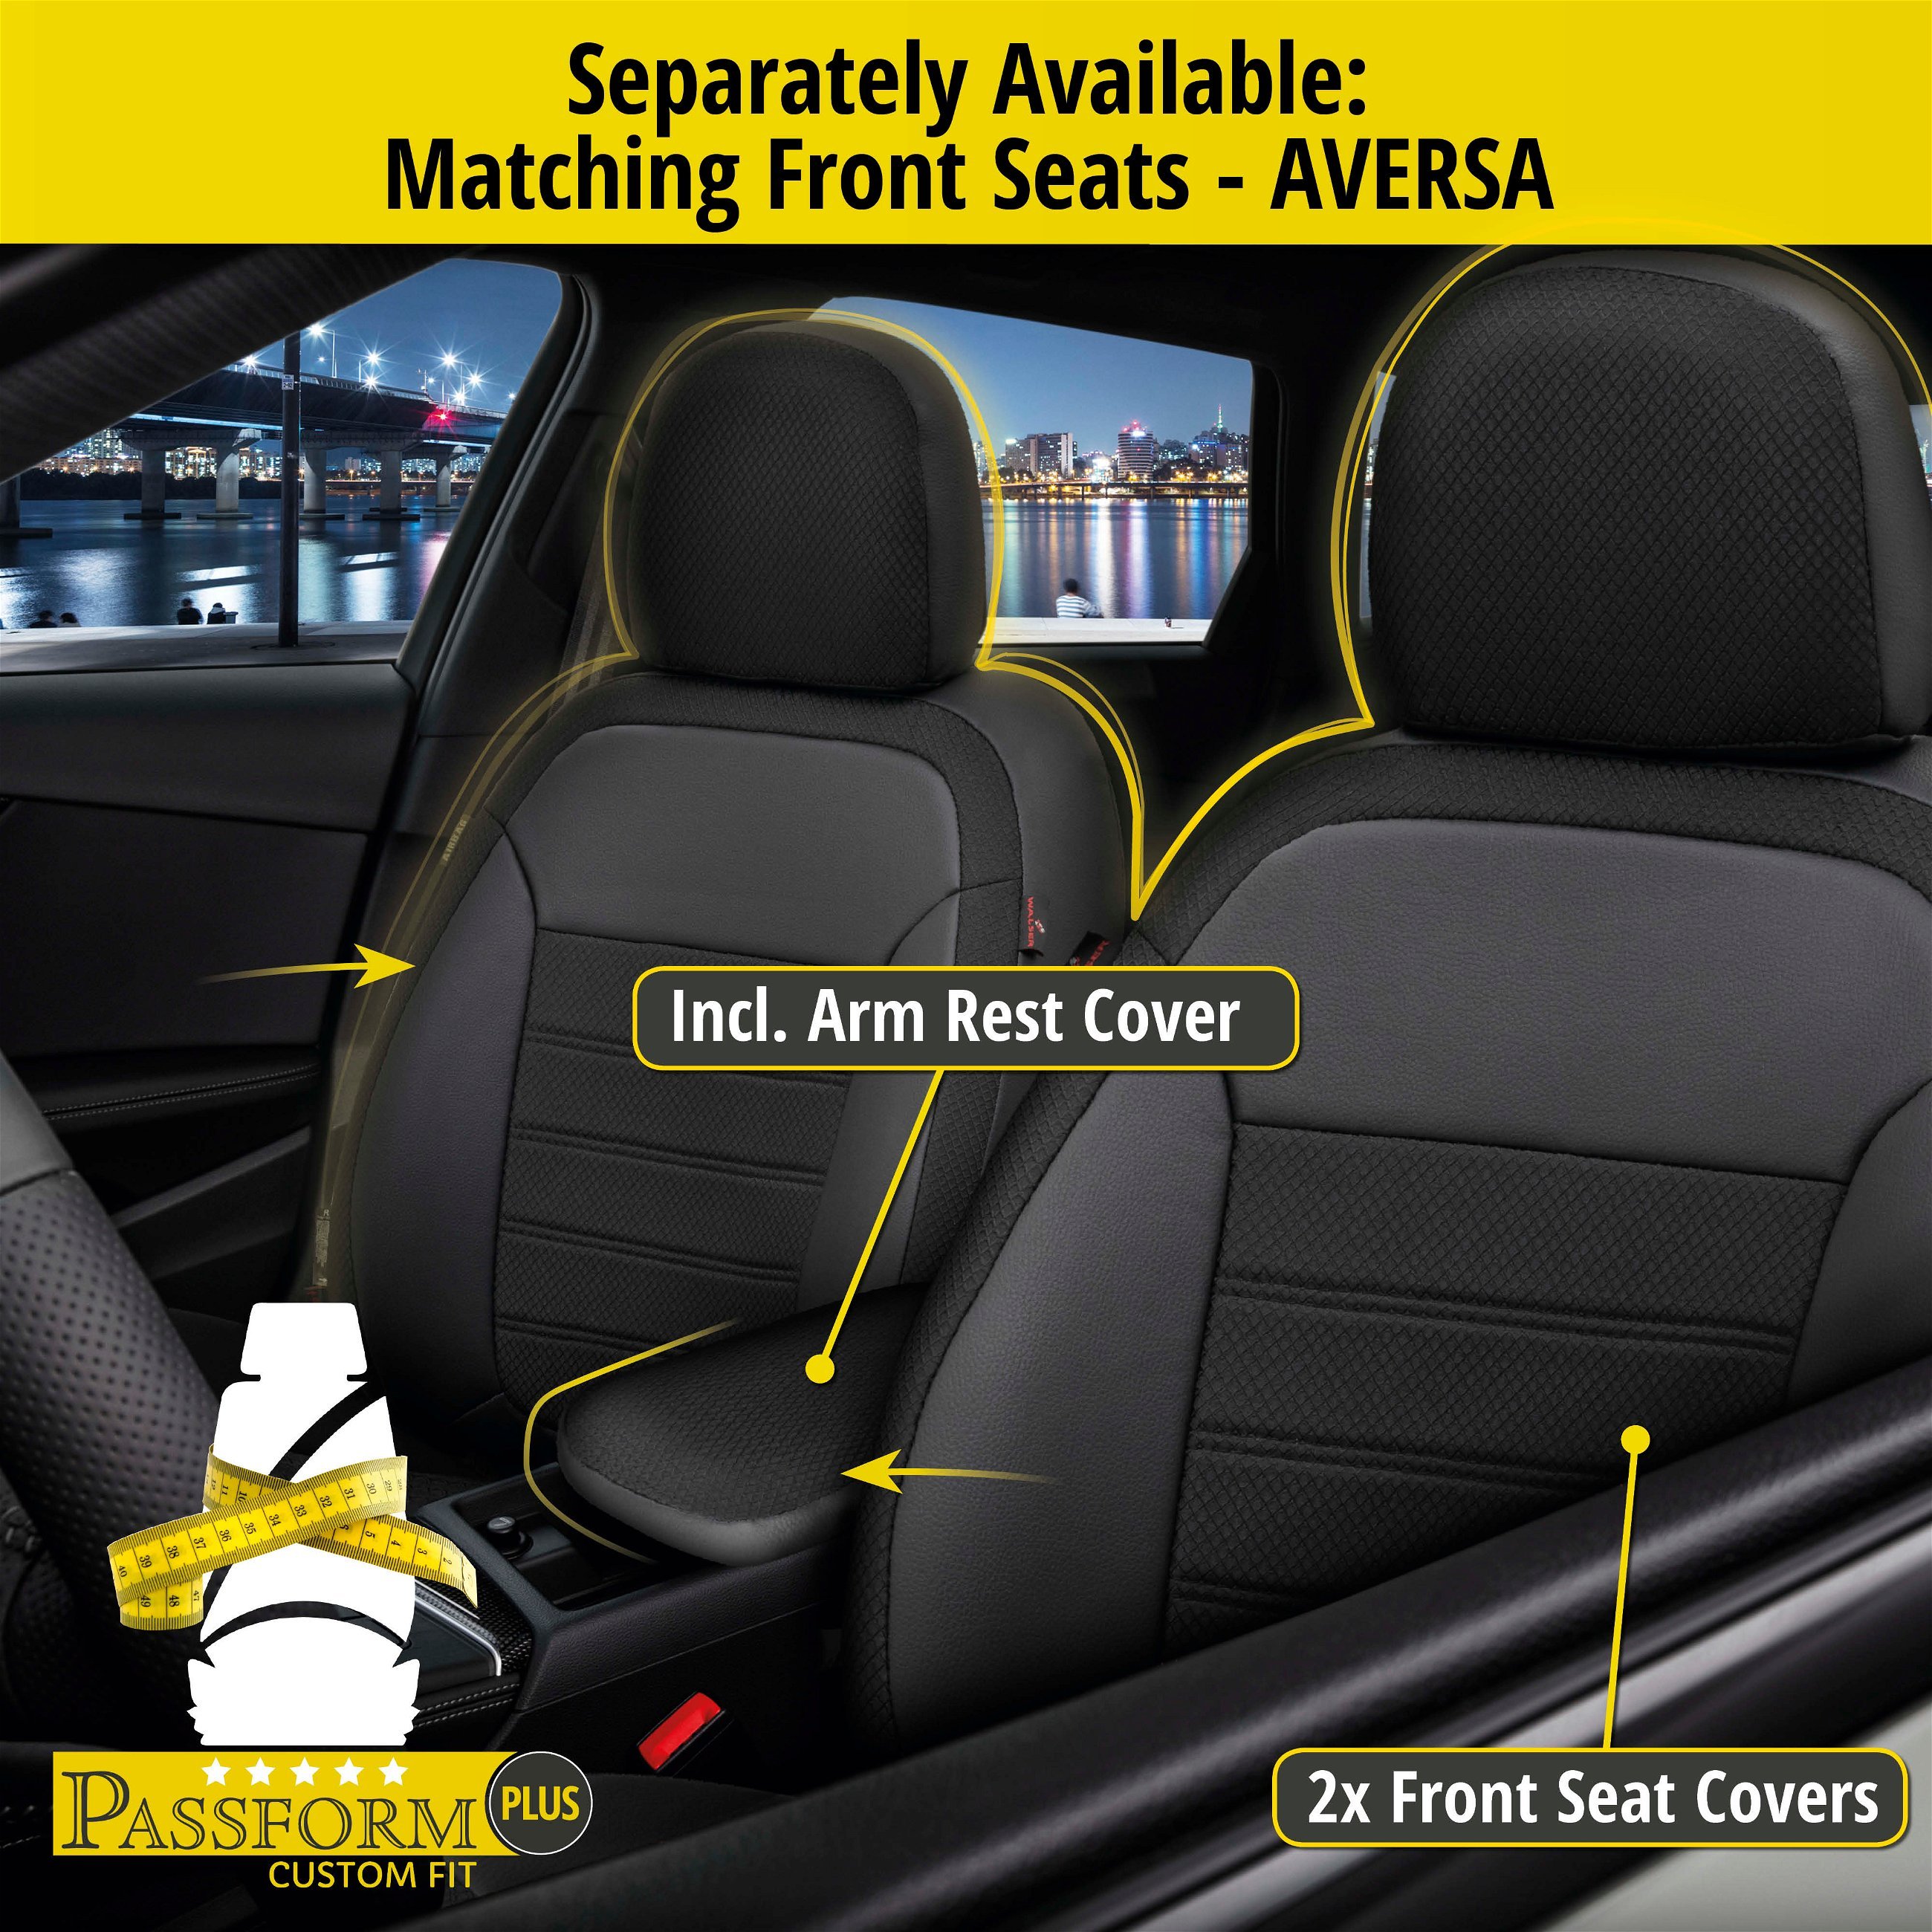 Seat Cover Aversa for Hyundai i10 (BA, IA) 08/2013-Today, 1 rear seat cover for normal seats